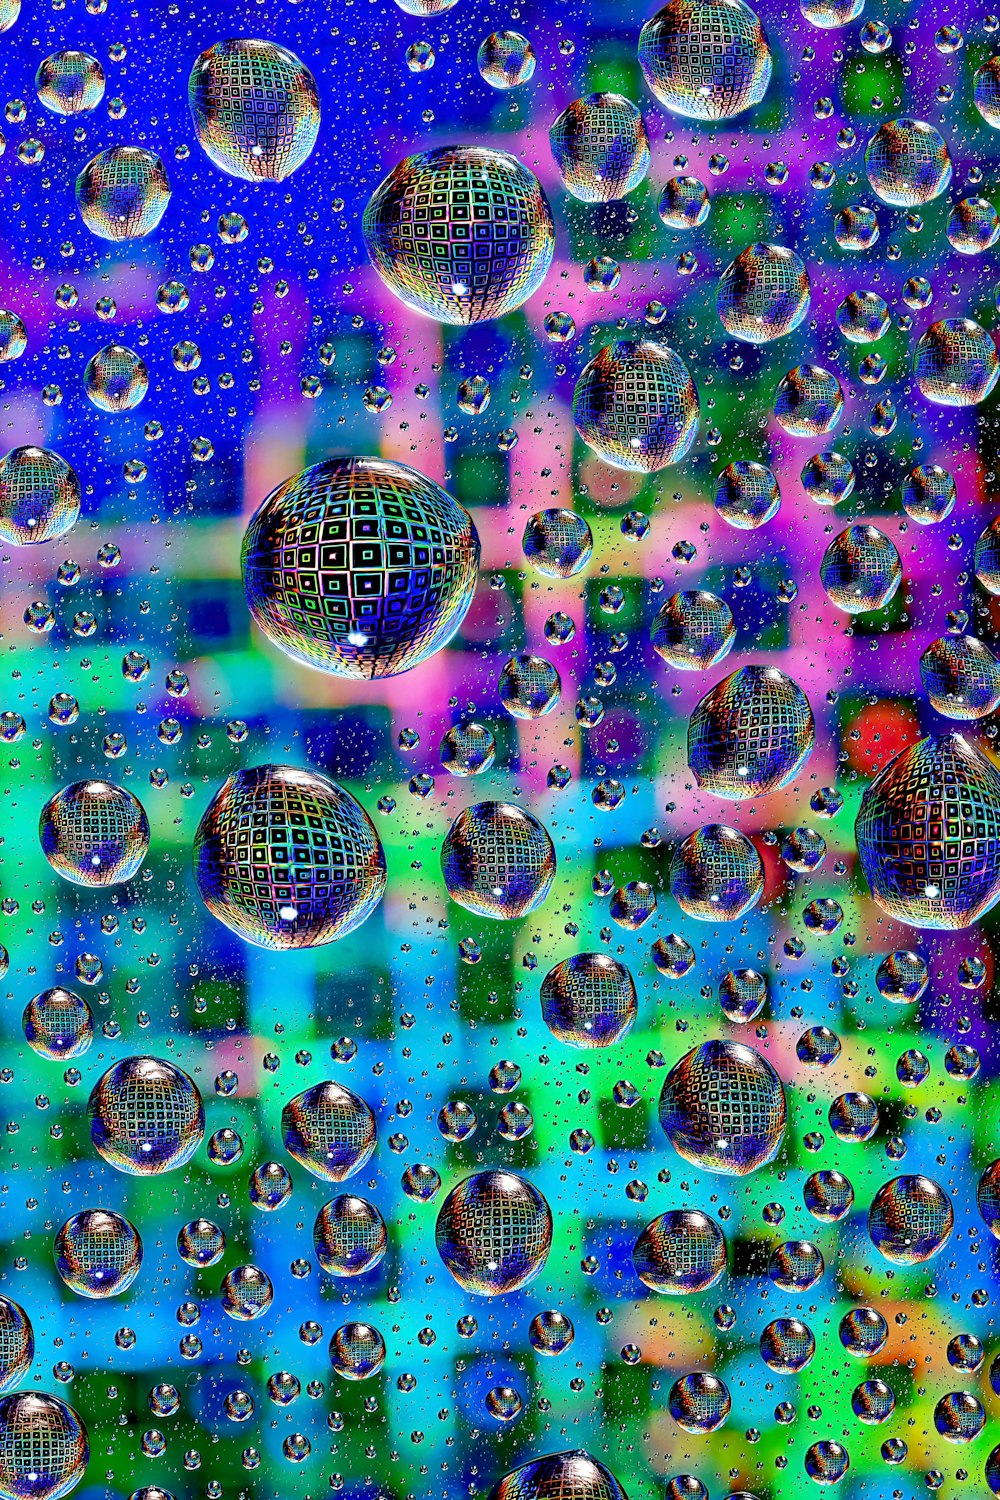 a group of bubbles floating on top of a blue and green surface